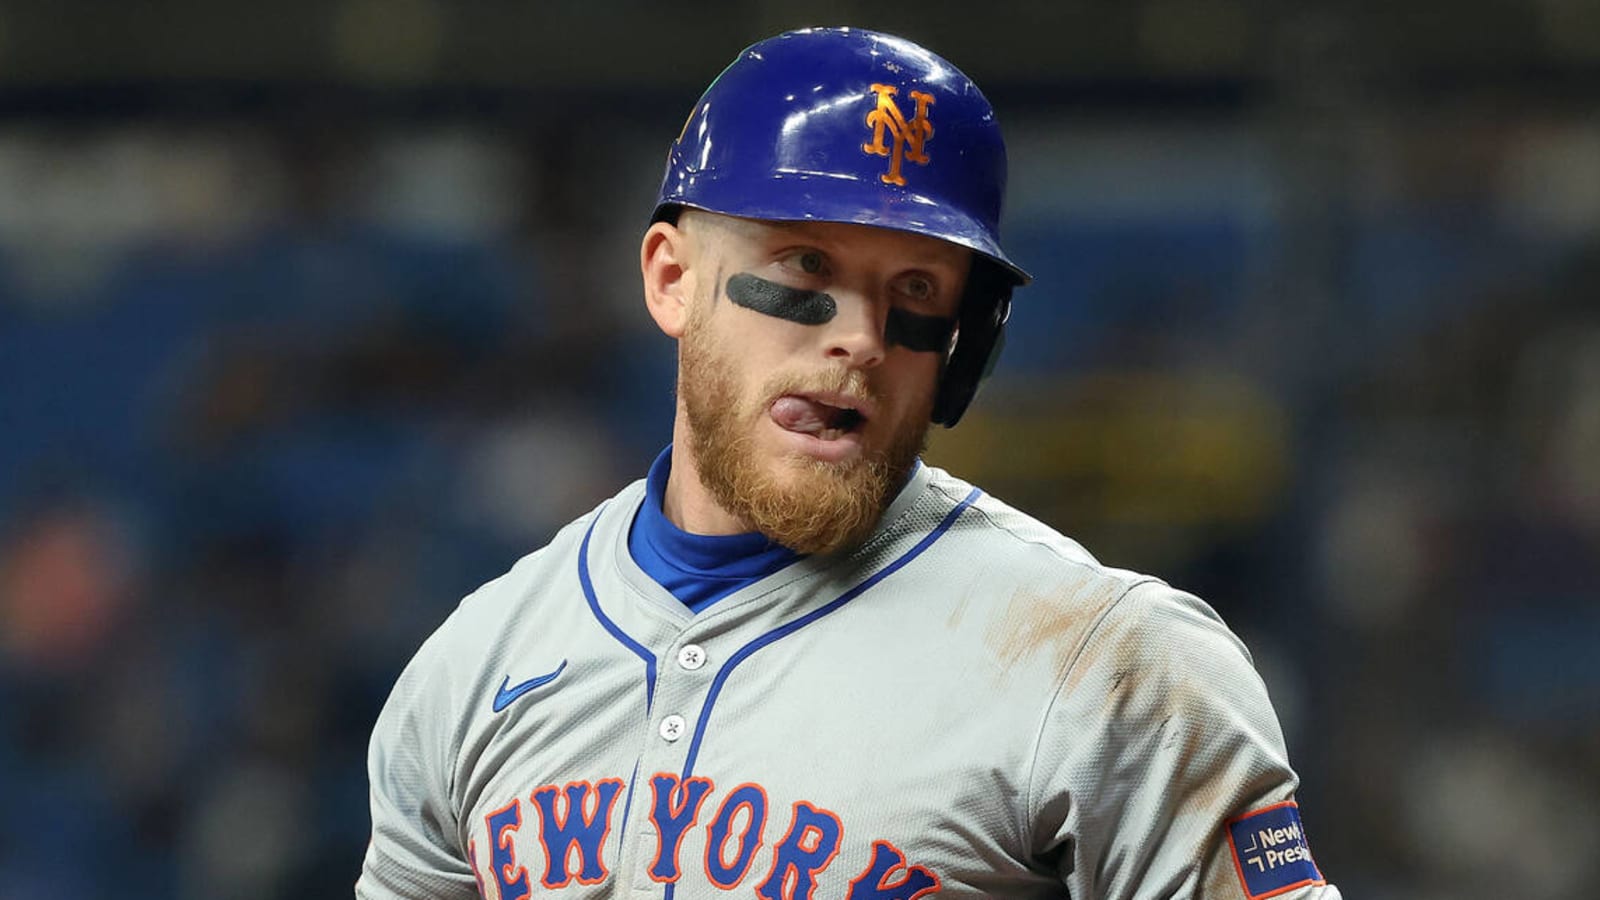 Mets star outfielder returns to form after recent benching